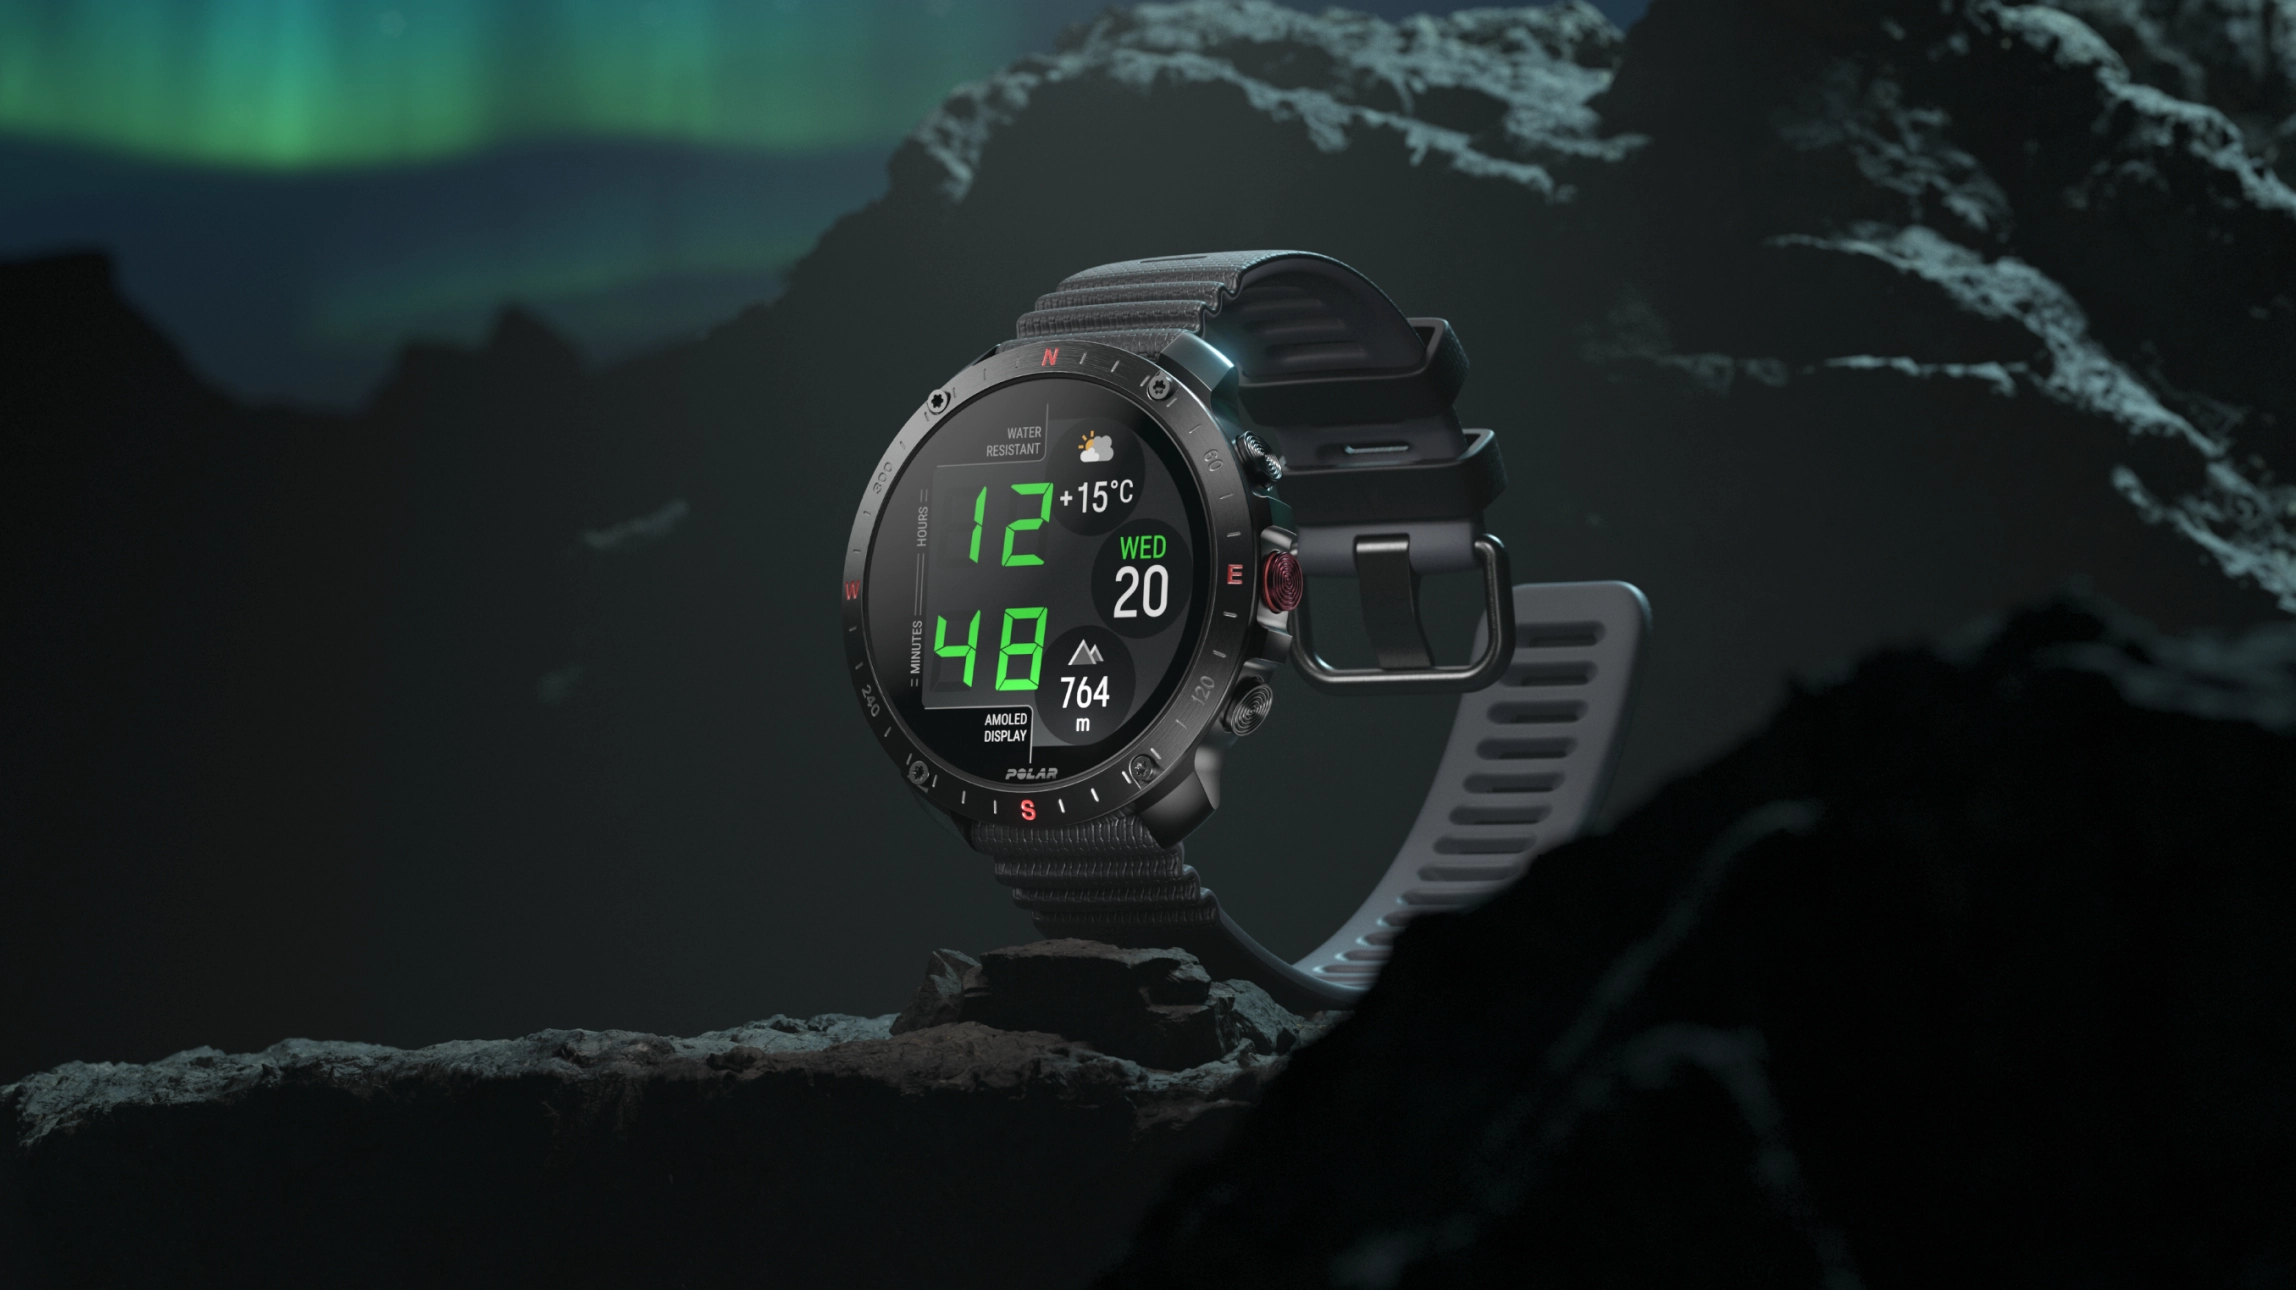 The New Polar Grit X2 Pro Smartwatch is Your Rugged Companion for Every Adventure - News - News